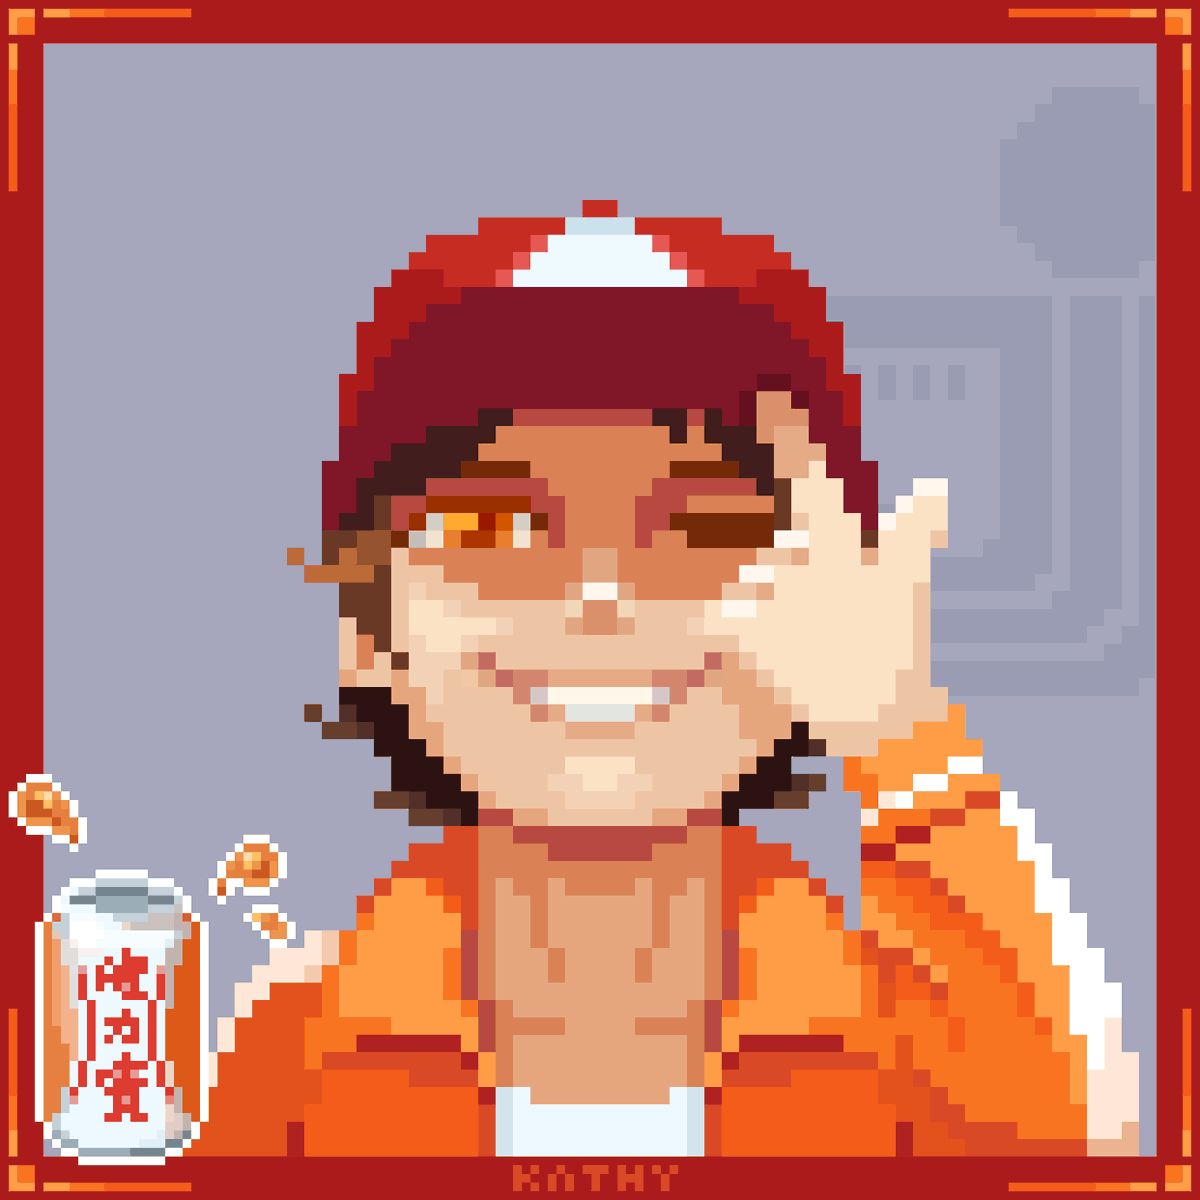 Another personated drink called Jianlibao, a popular orange-flavored sports drink when I was a child #pixelart #ドット絵